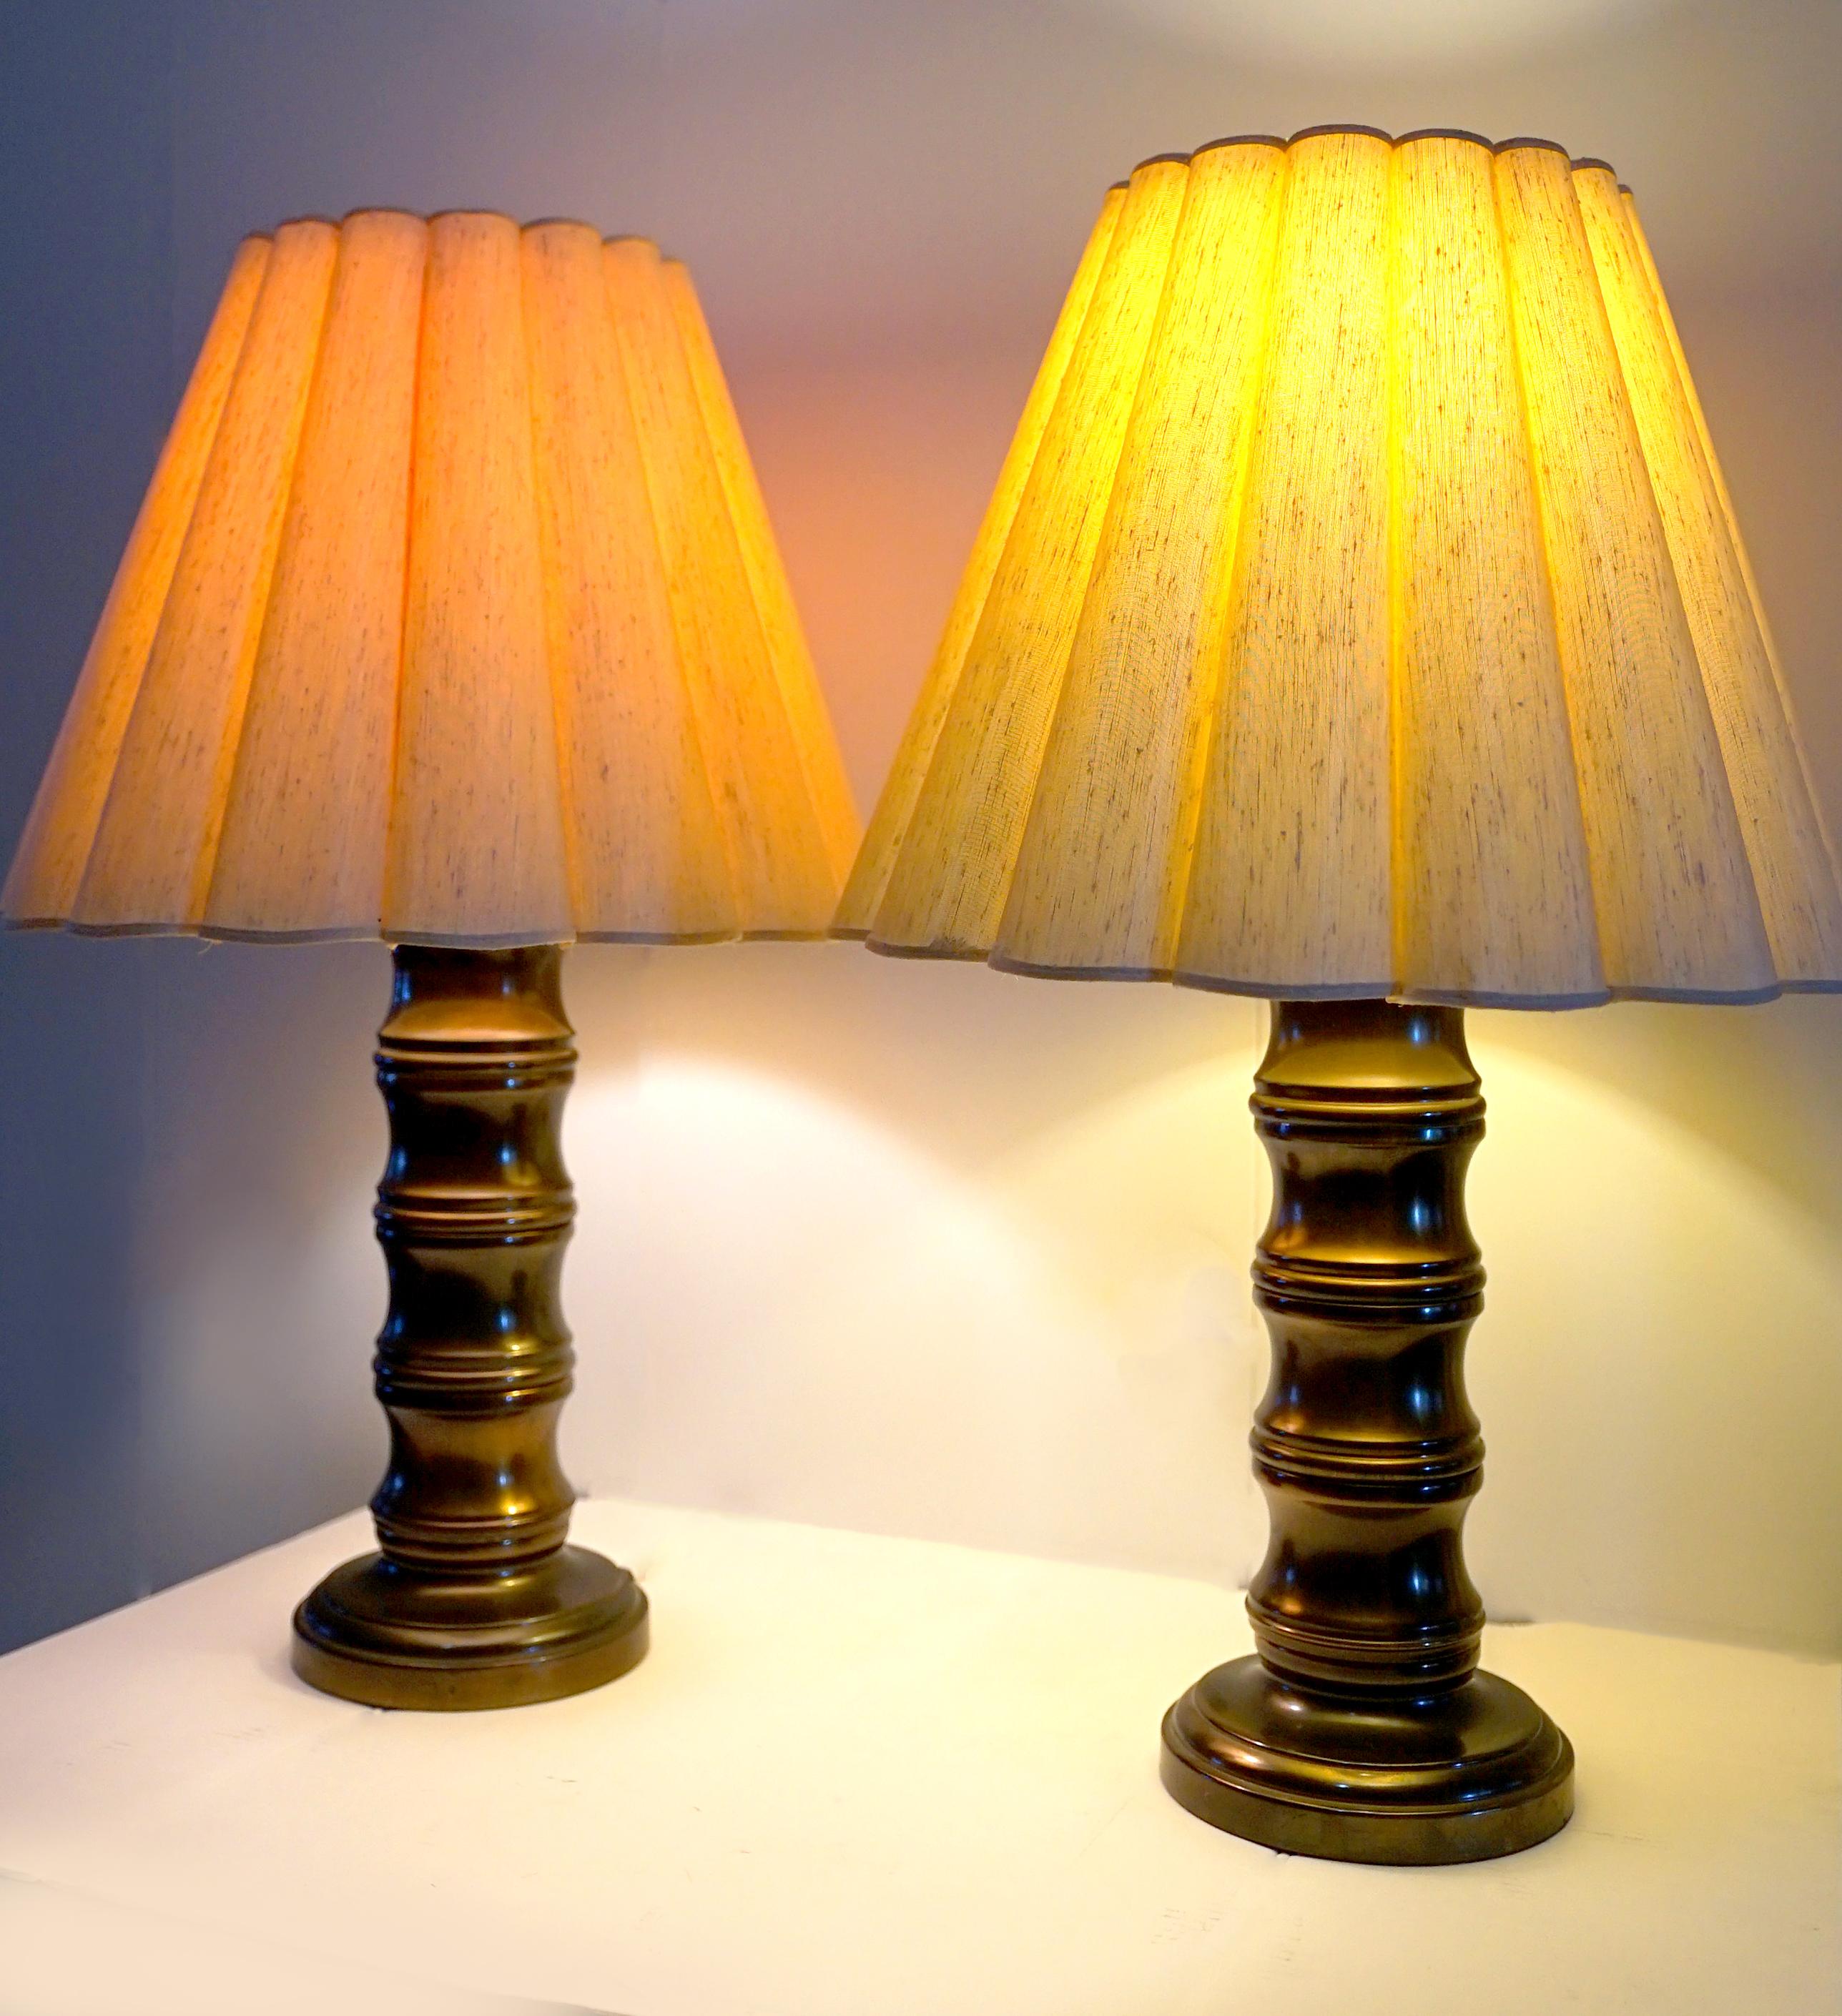 I love, love love this set of lamps for their condition and the silhouette. The burnished brass and the beautiful umbrella-like pleated shades that filter the light in a warm and luminous way, helps make these lamps irresistible. There is so much to